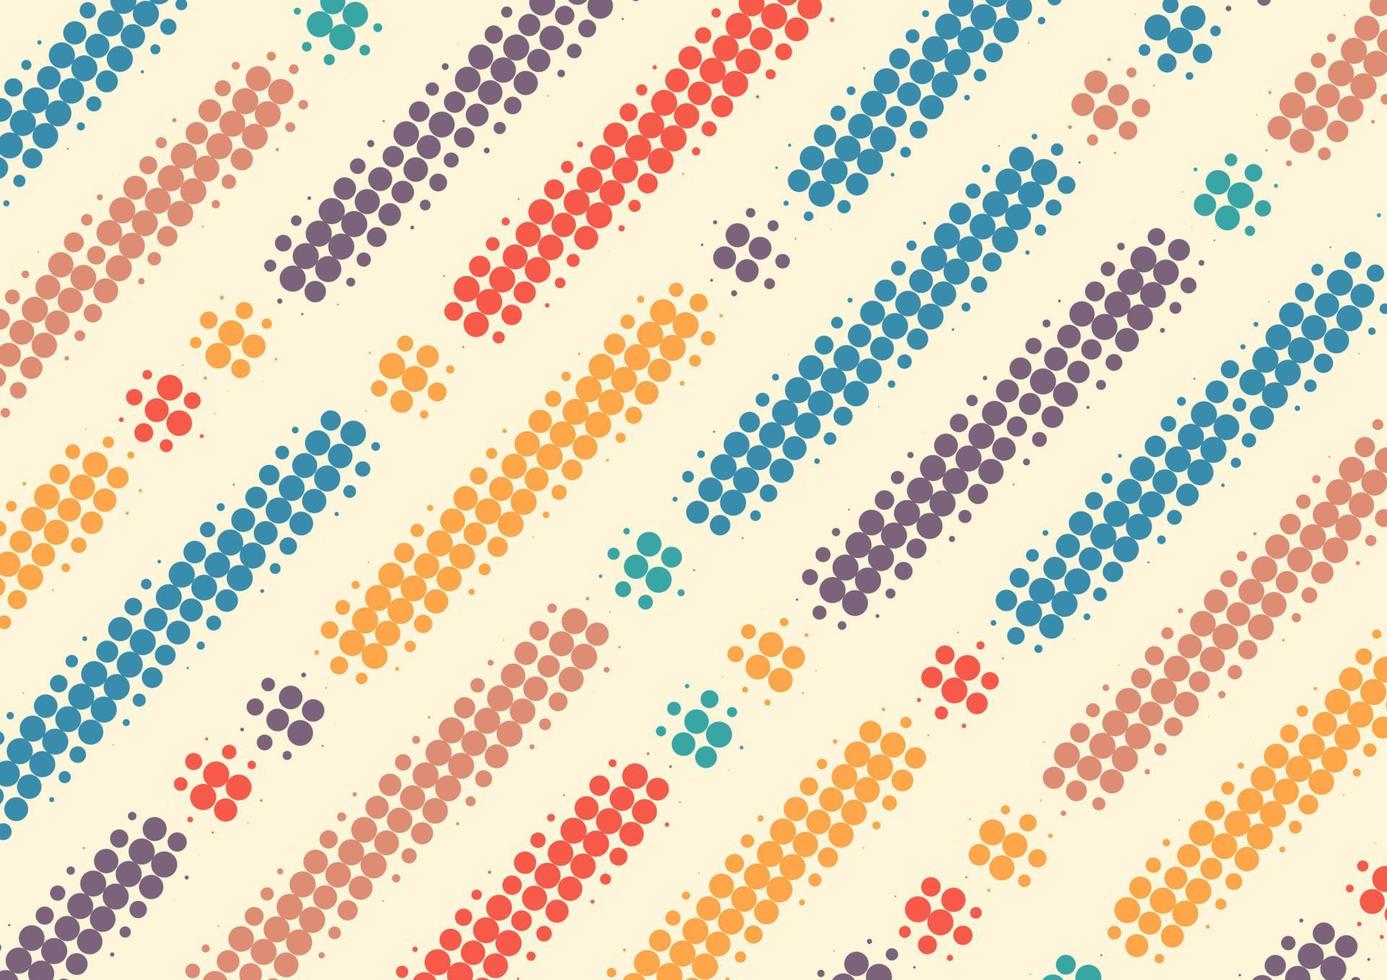 Vintage retro colorful with halftone dots background vector